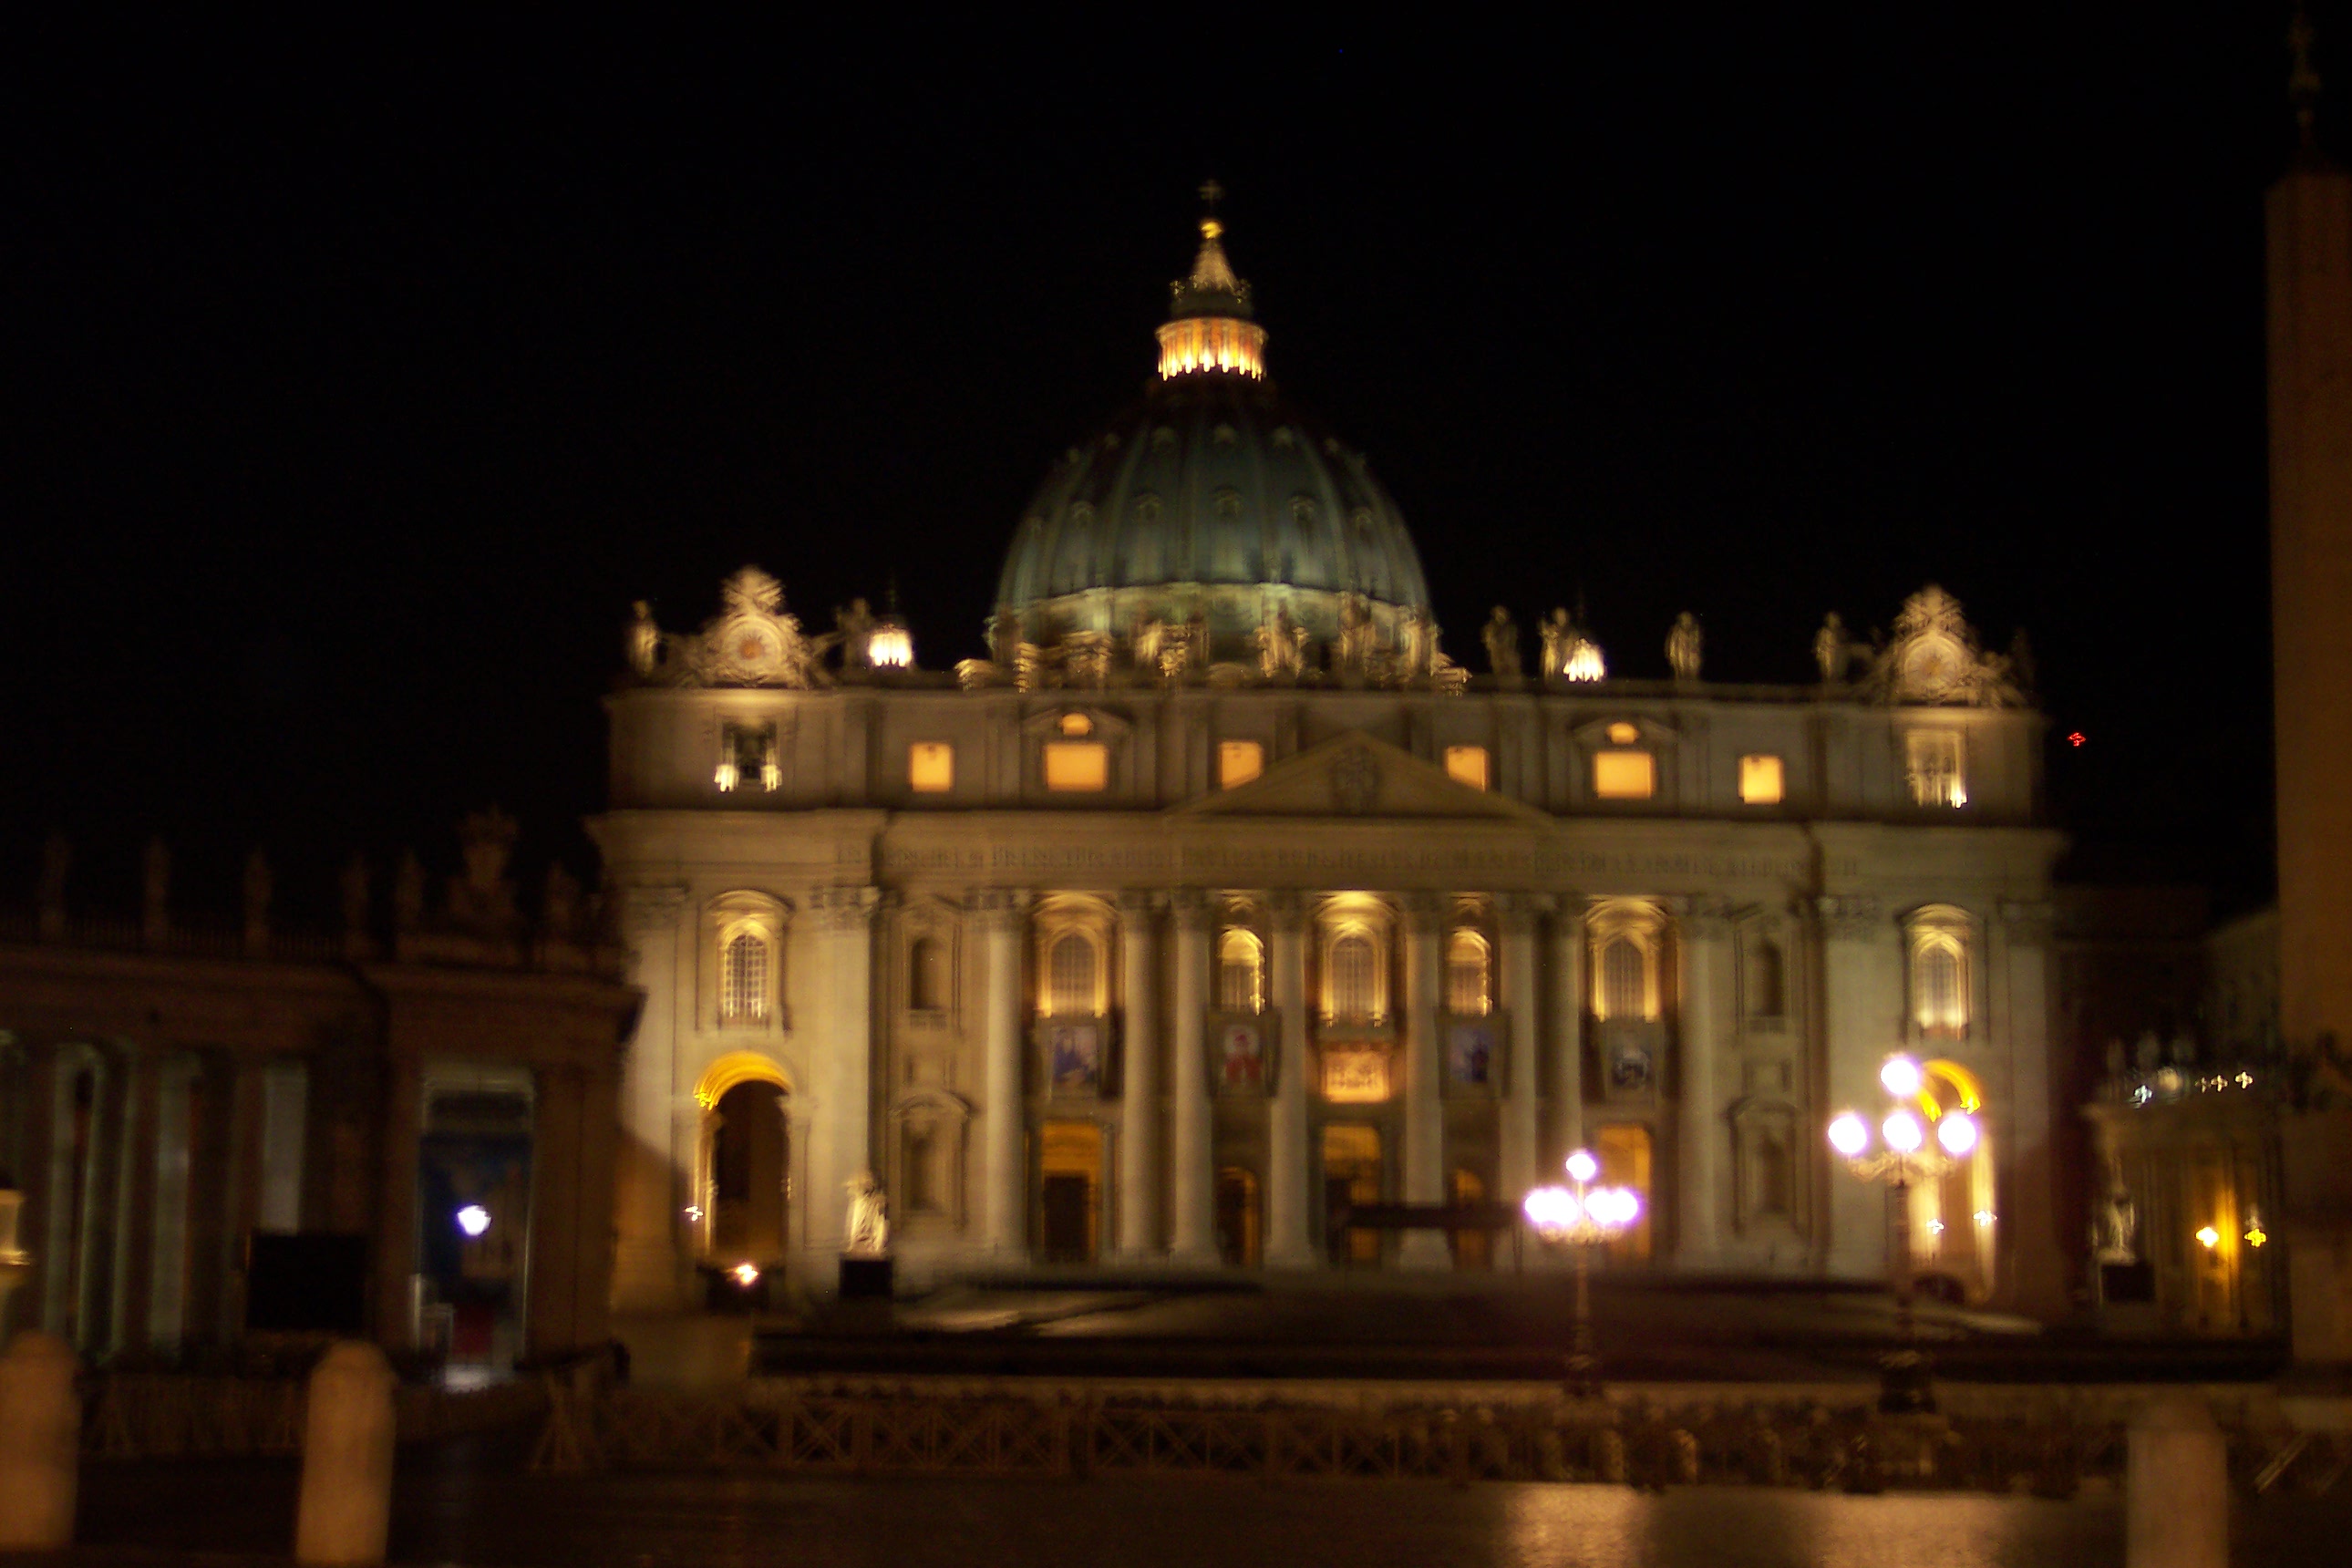 St. Peter by night